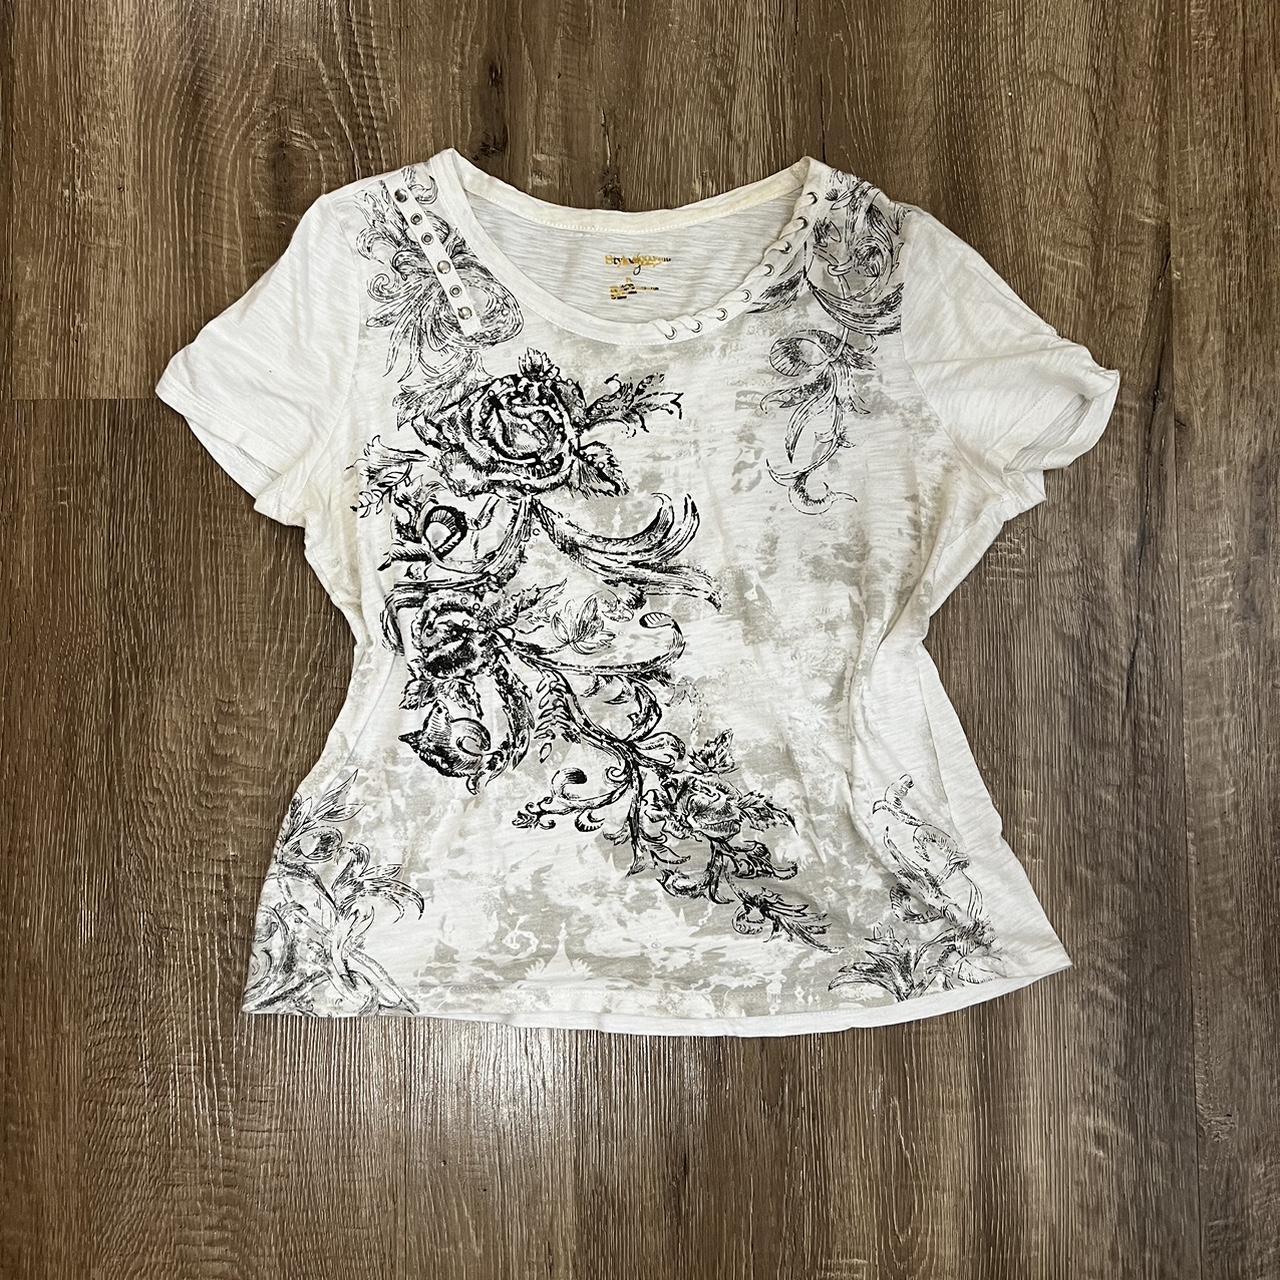 cute y2k design white tee - cool lace up feature... - Depop